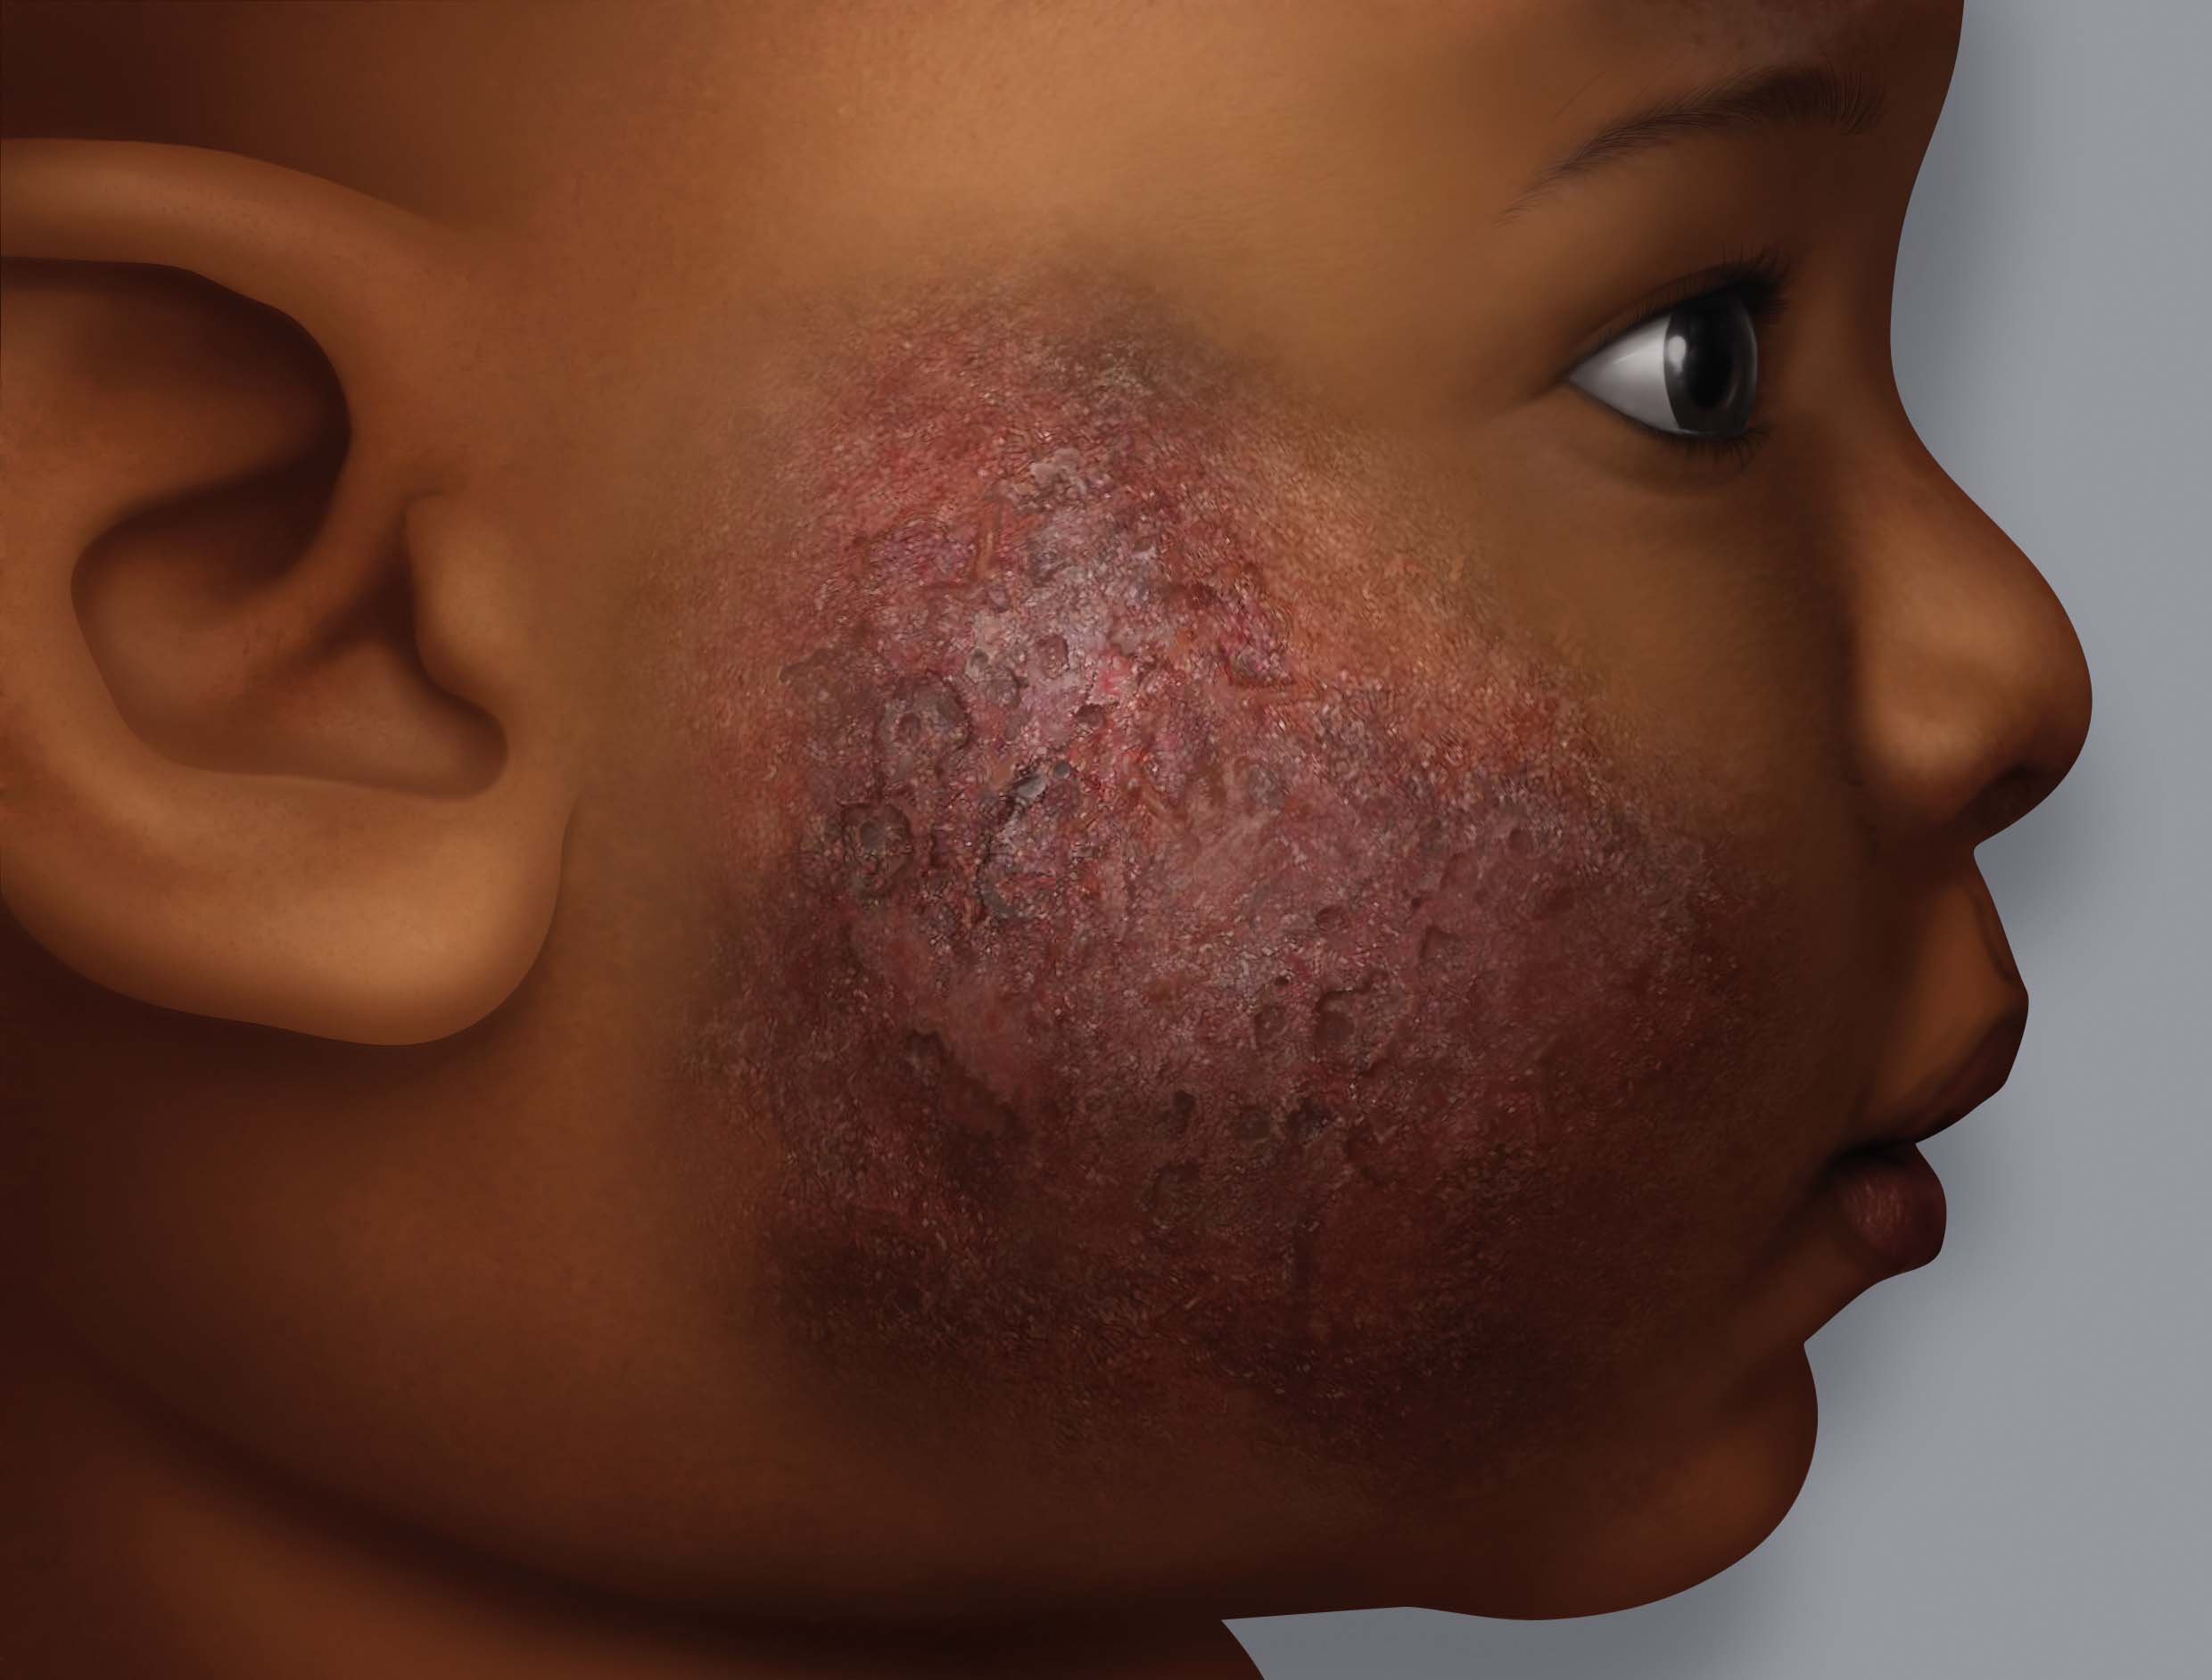 This skin condition is very common in children, but adults can get it too. Photo/Net